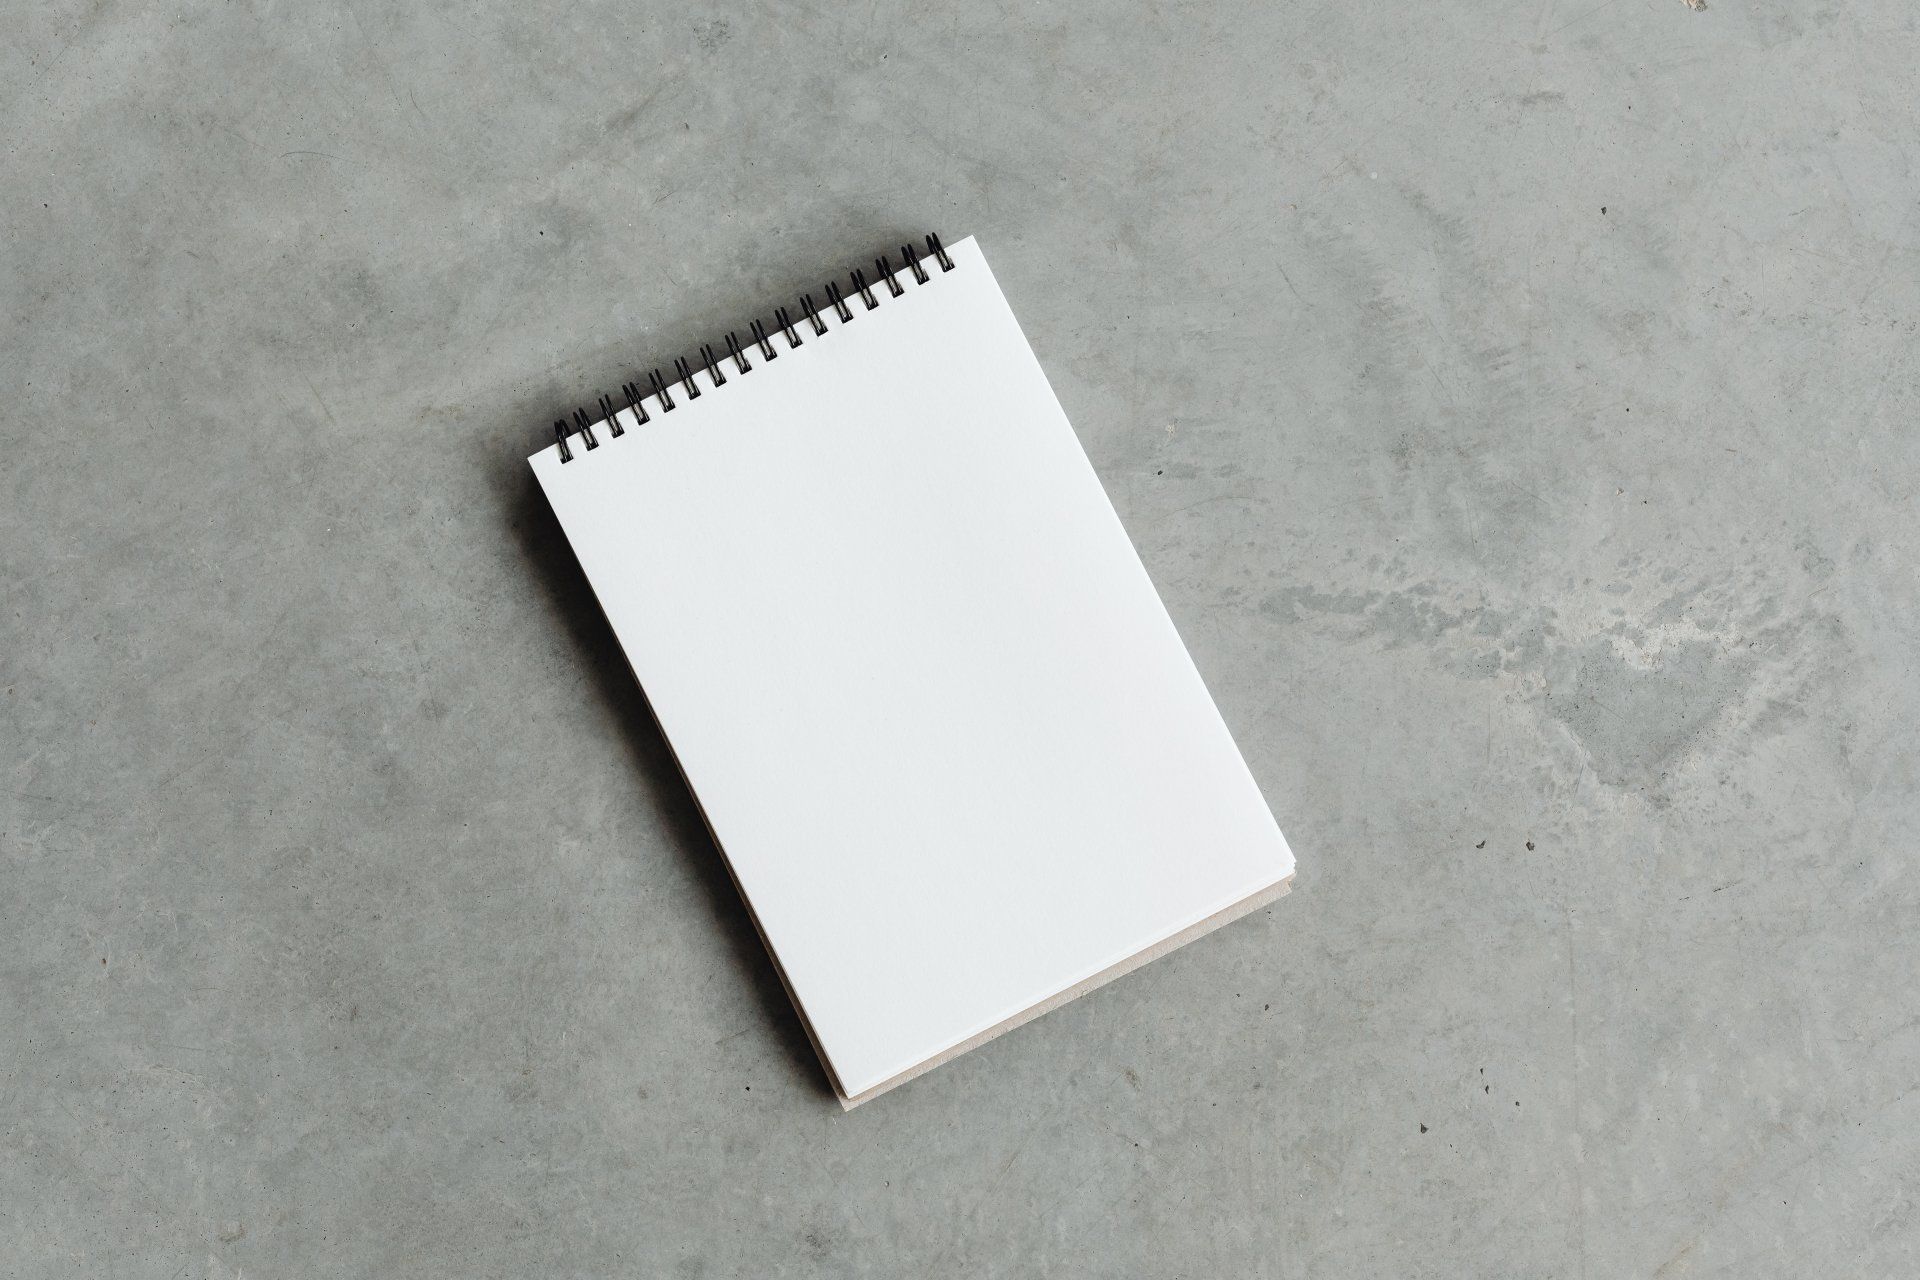 a sketch pad on a concrete flooring